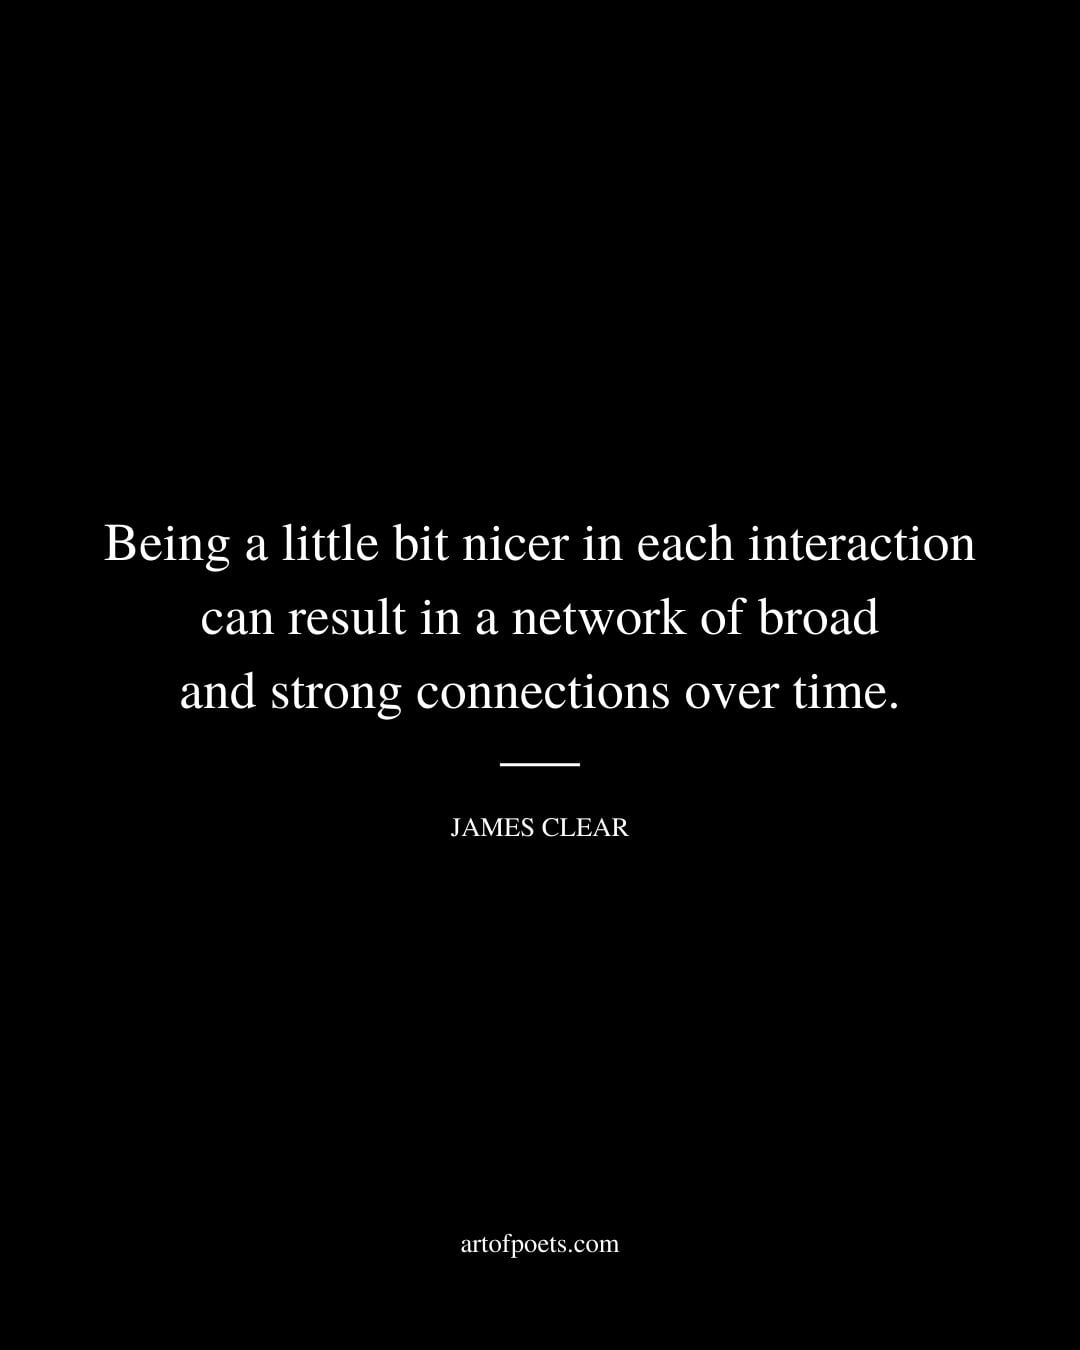 Being a little bit nicer in each interaction can result in a network of broad and strong connections over time